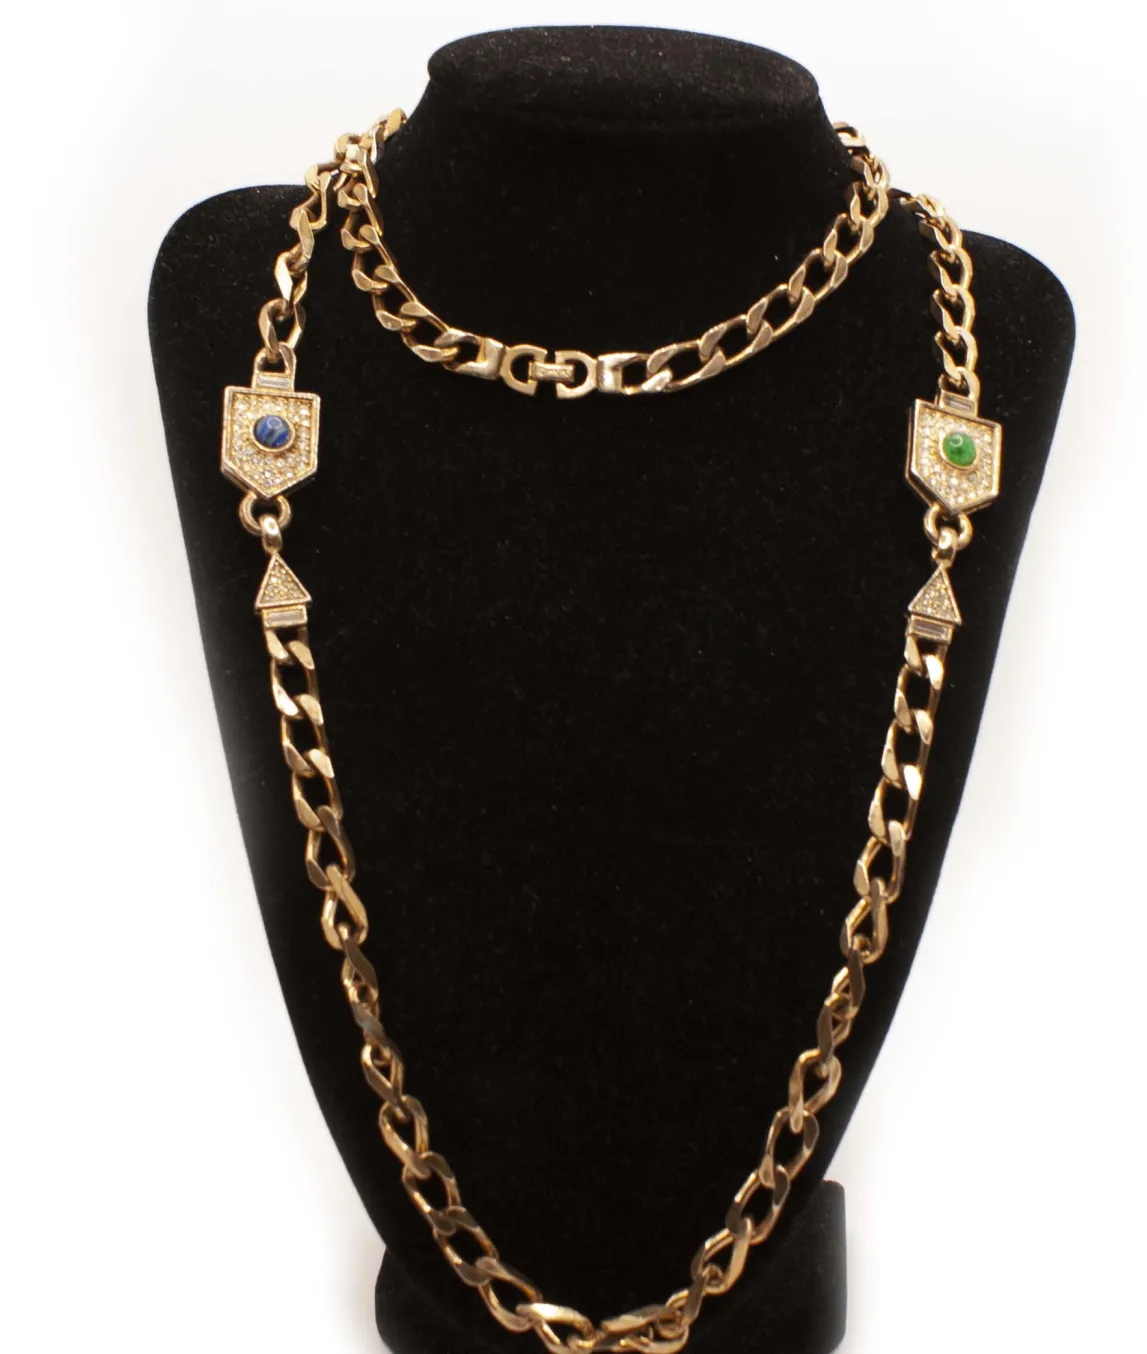 Christian Dior Opera Length Chain with Green and blue glass cabochons